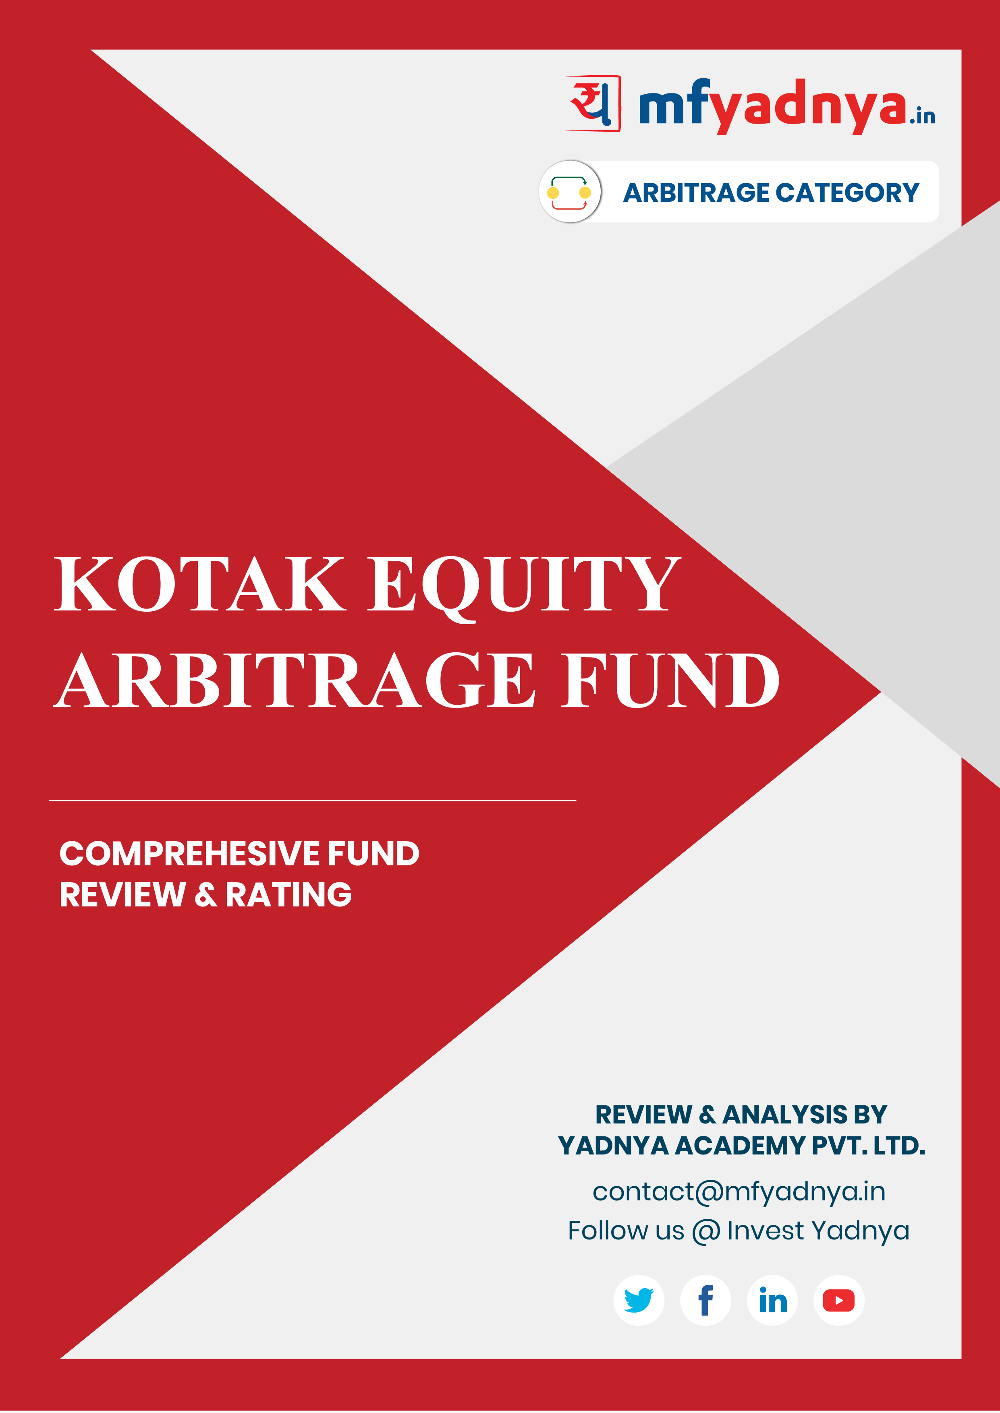 This e-book offers a comprehensive mutual fund review of Kotak Equity Arbitrage Fund. It reviews the fund's return, ratio, allocation etc. ✔ Detailed Mutual Fund Analysis ✔ Latest Research Reports